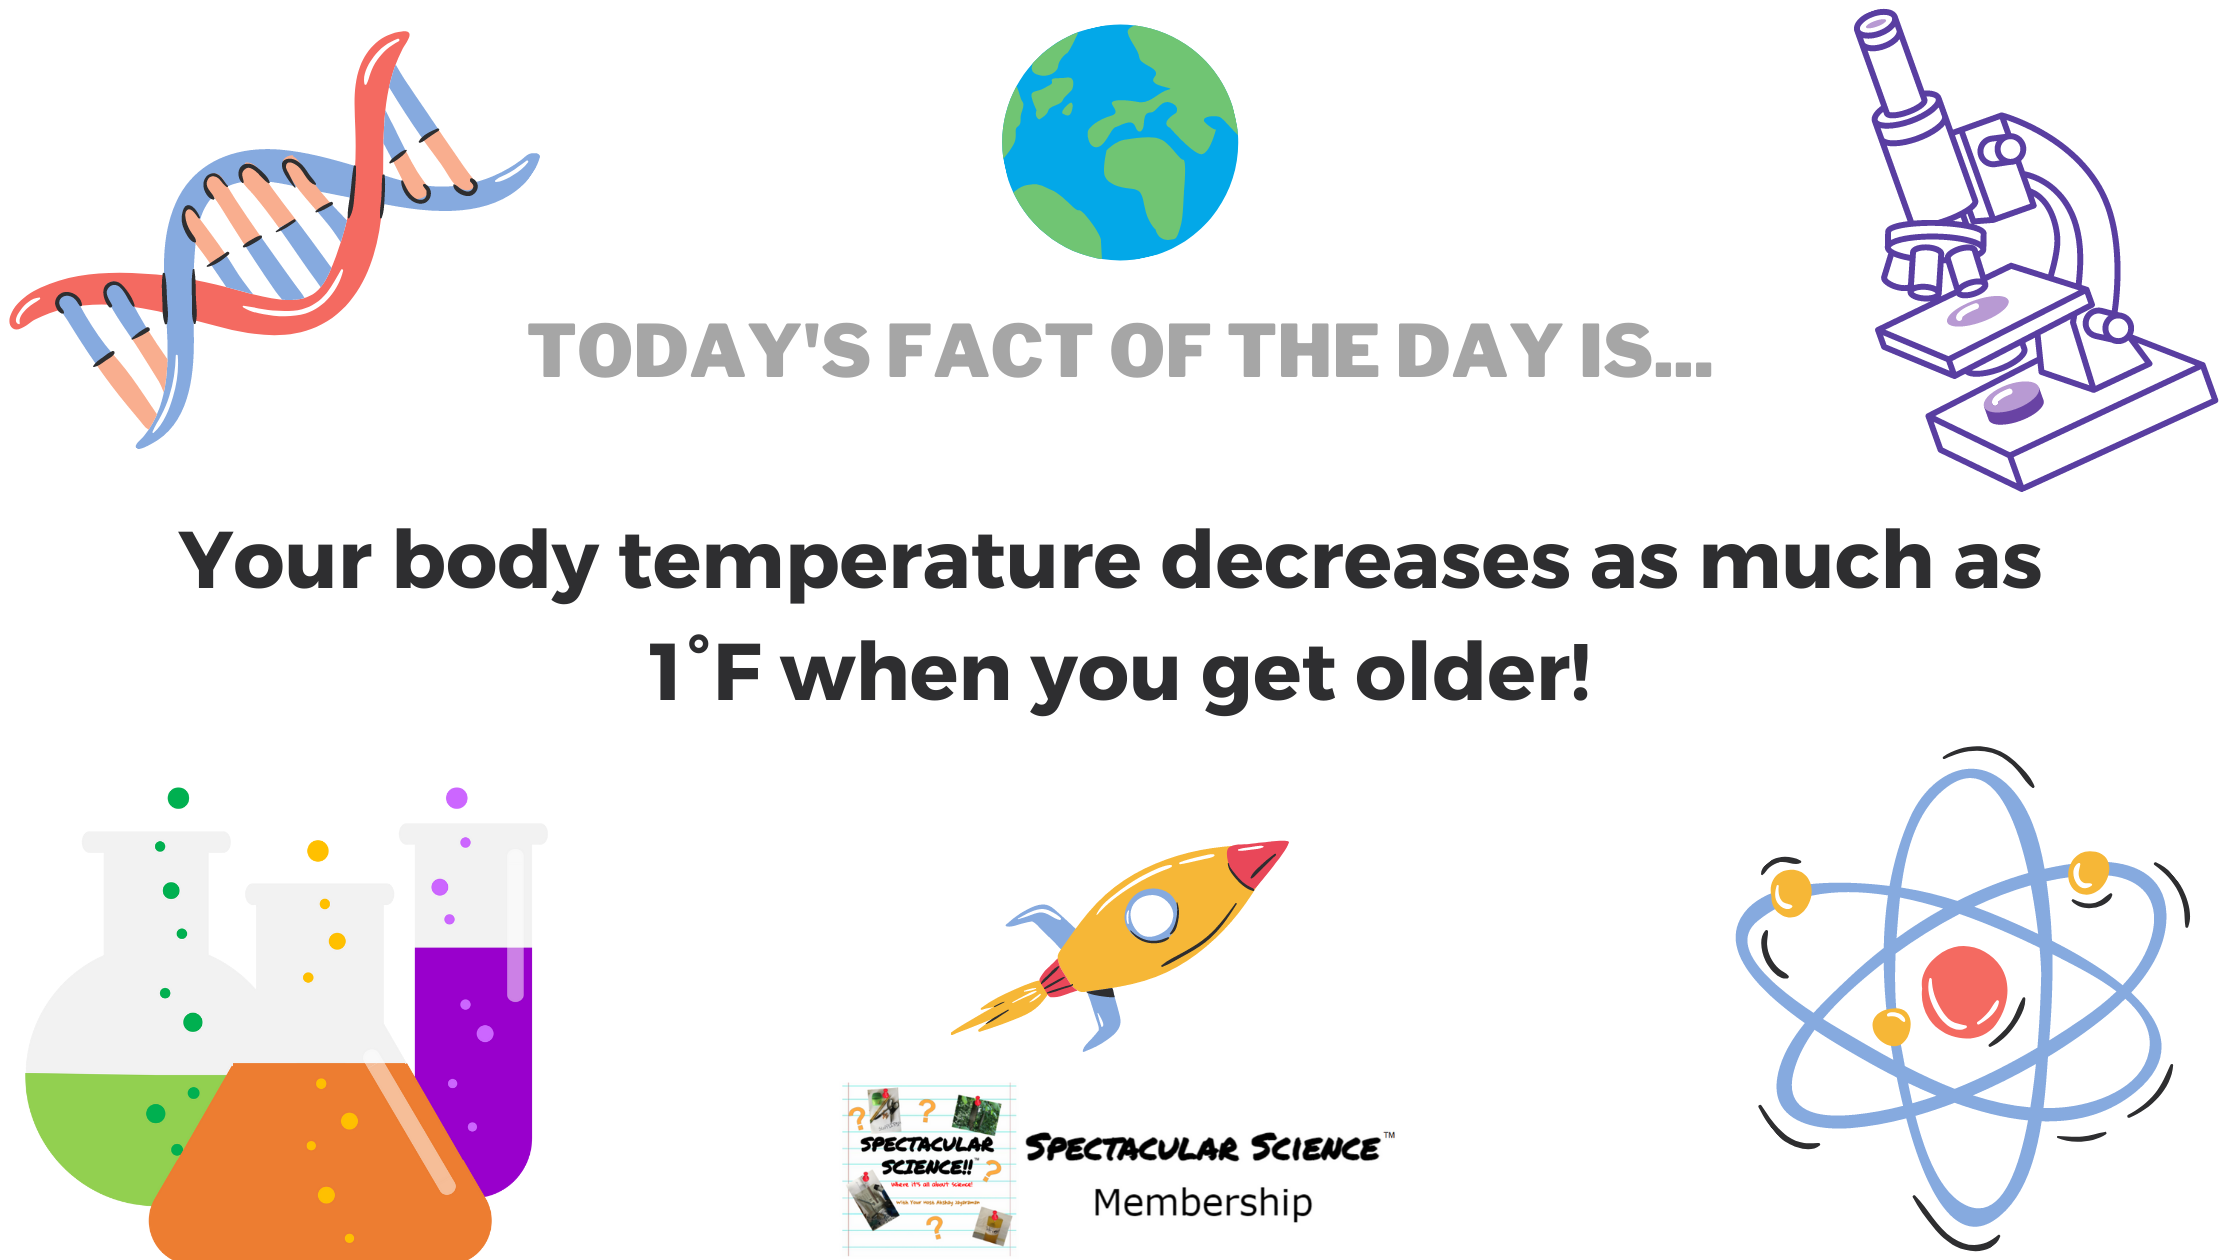 Fact of the Day Image May 13th